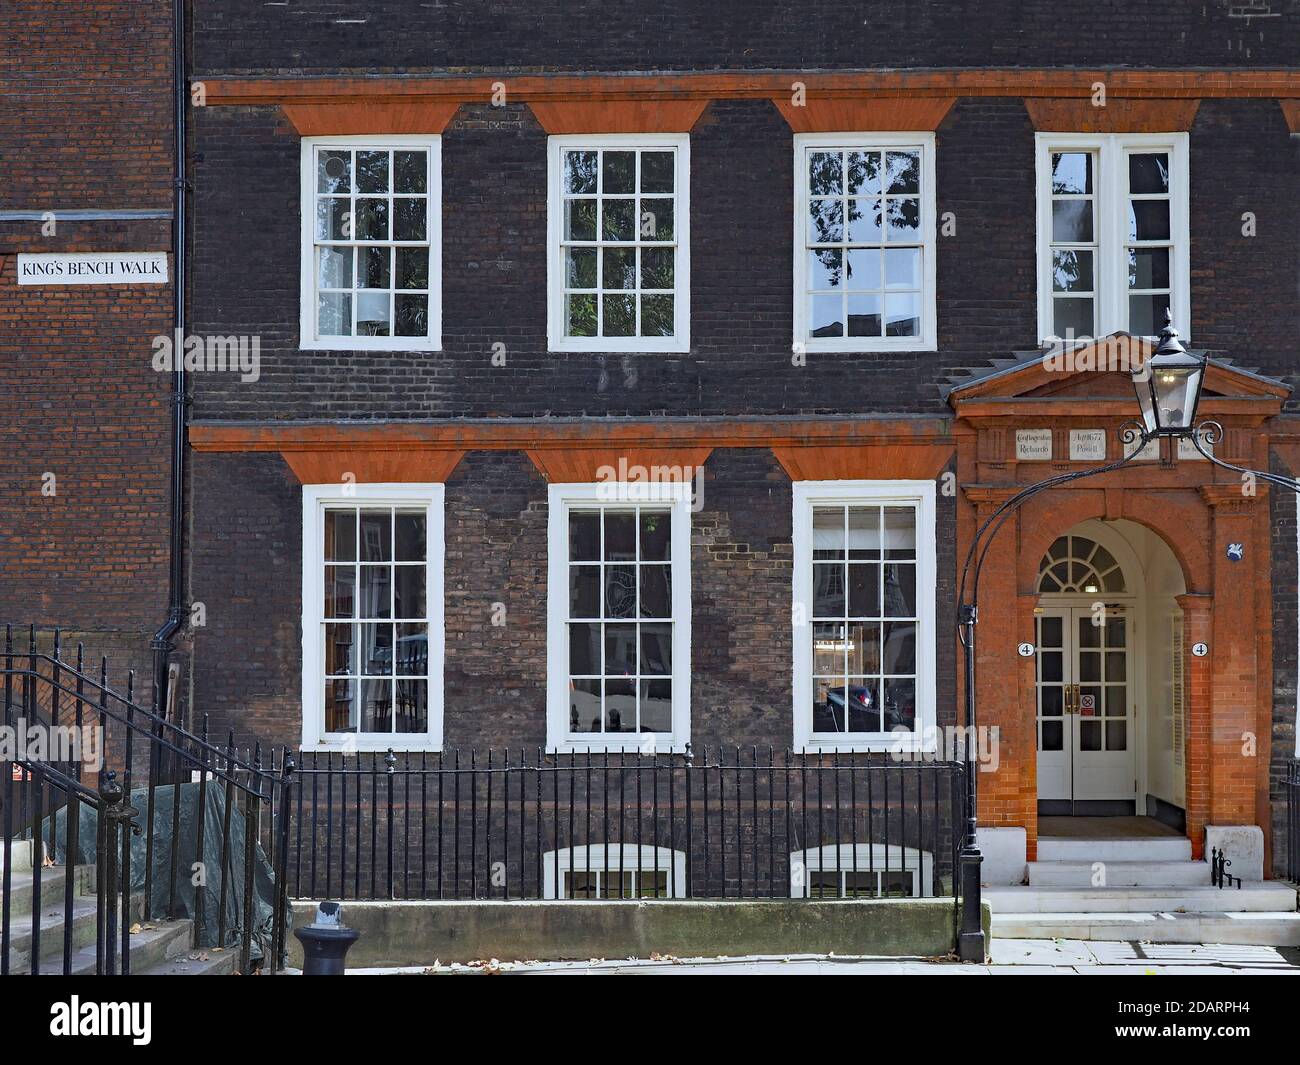 London, England - September 23, 2016:  Lawyers' offices at the Inner Temple, rebuilt in 1678 after older buildings were destroyed in a fire. Stock Photo